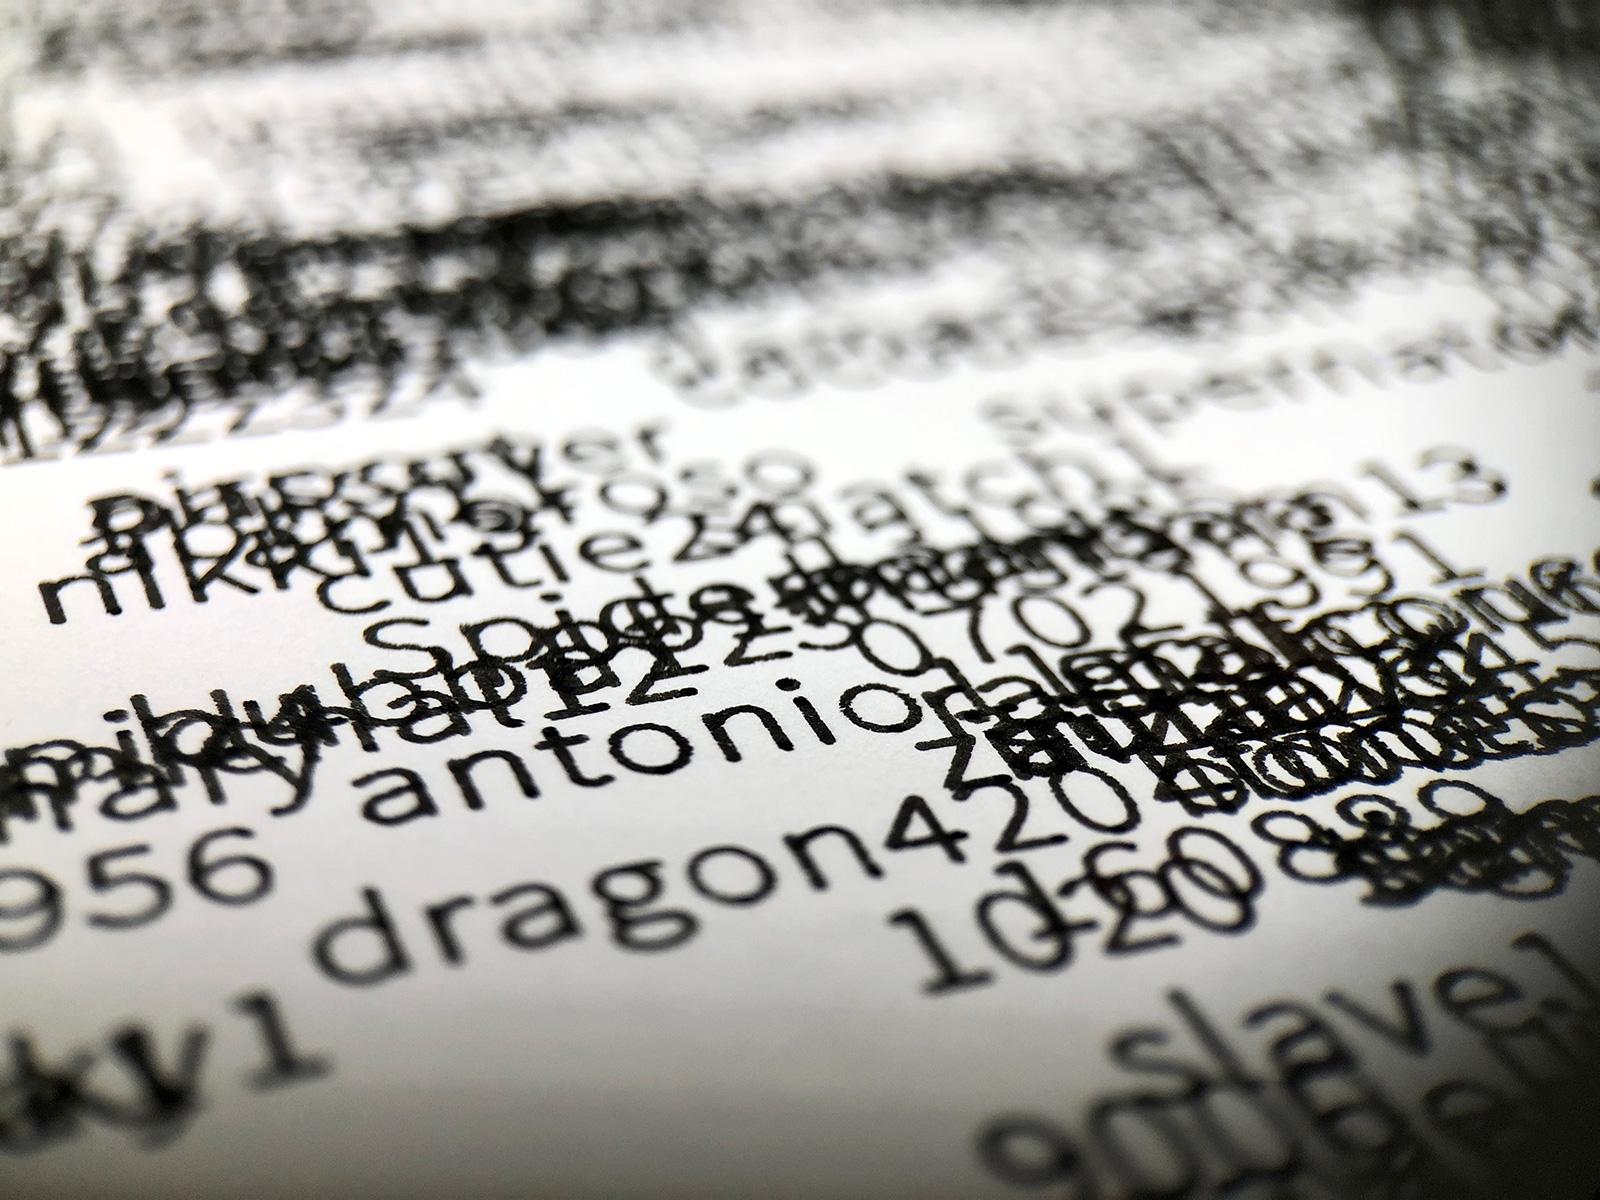 A close-up of a smaller area, revealing passwords like "dragon420" and "cutie24"